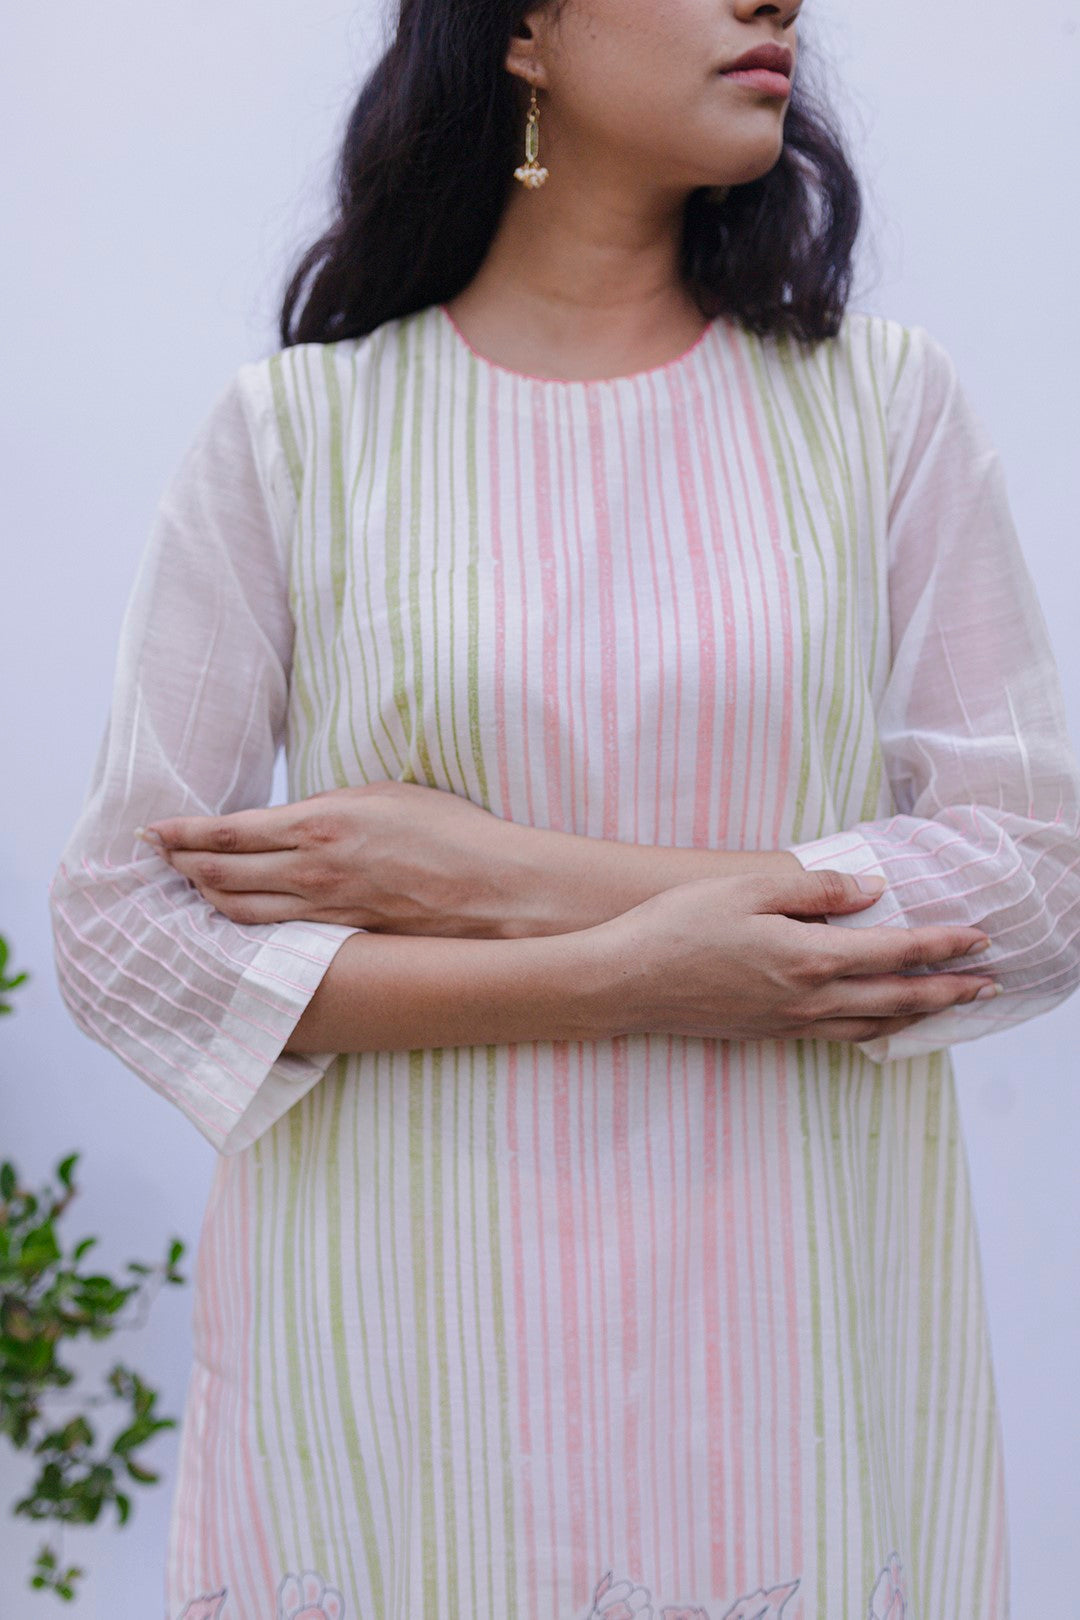 IVORY CHANDERI BLOCK PRINTED STRIPE AND FLORAL BACK BUTTON KURTA WITH PRINTED COTTON PANTS AND LACE STOLE